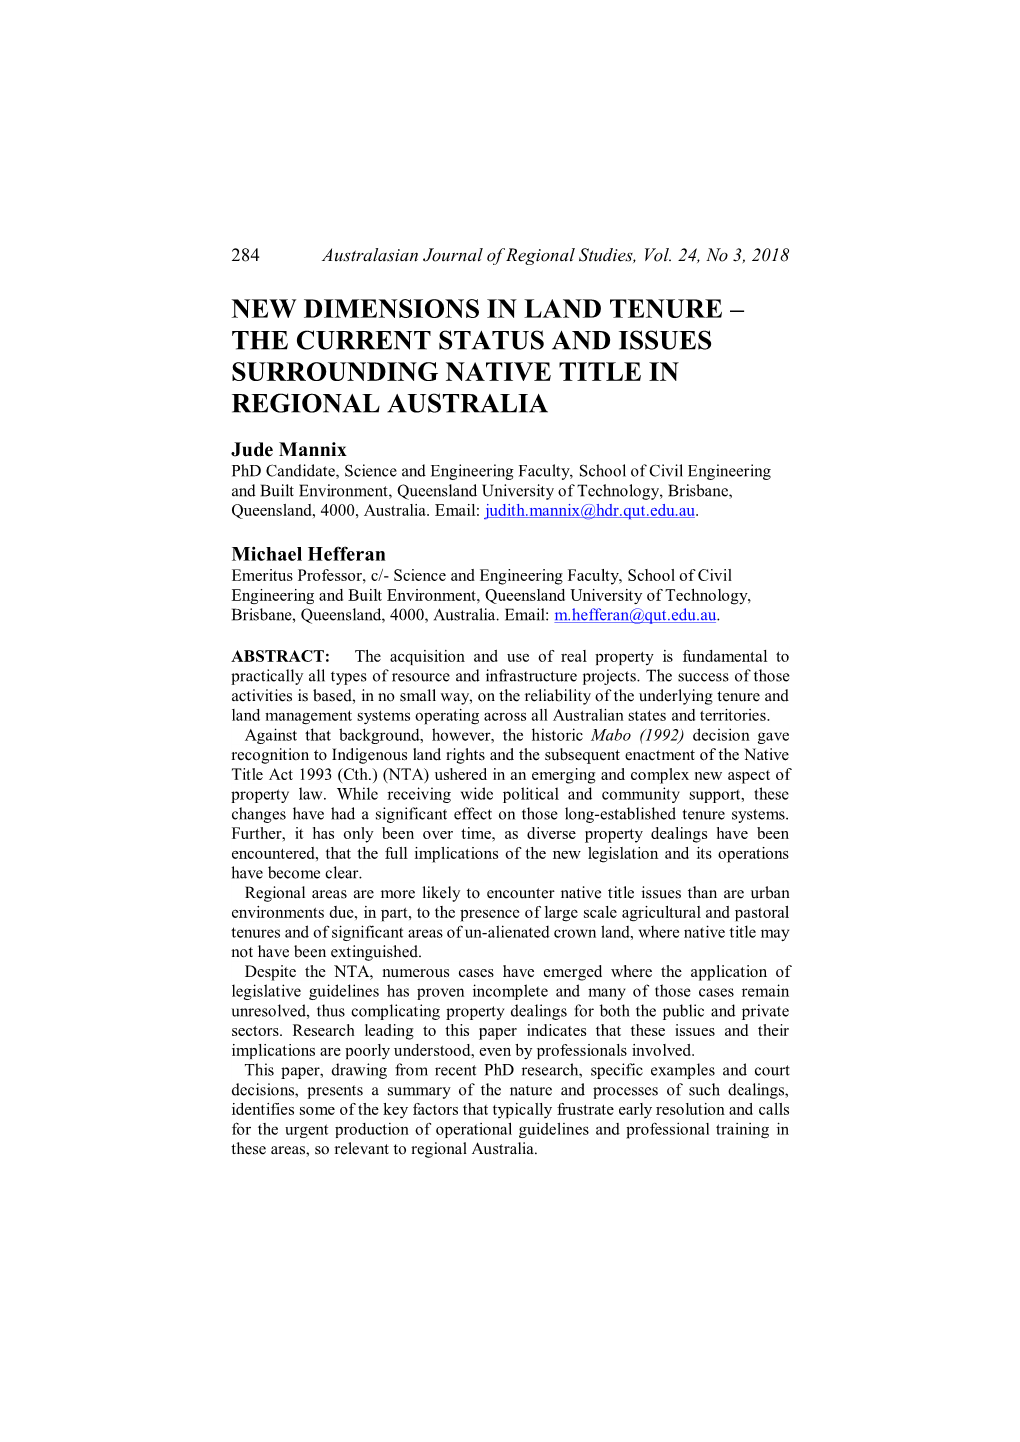 The Current Status and Issues Surrounding Native Title in Regional Australia